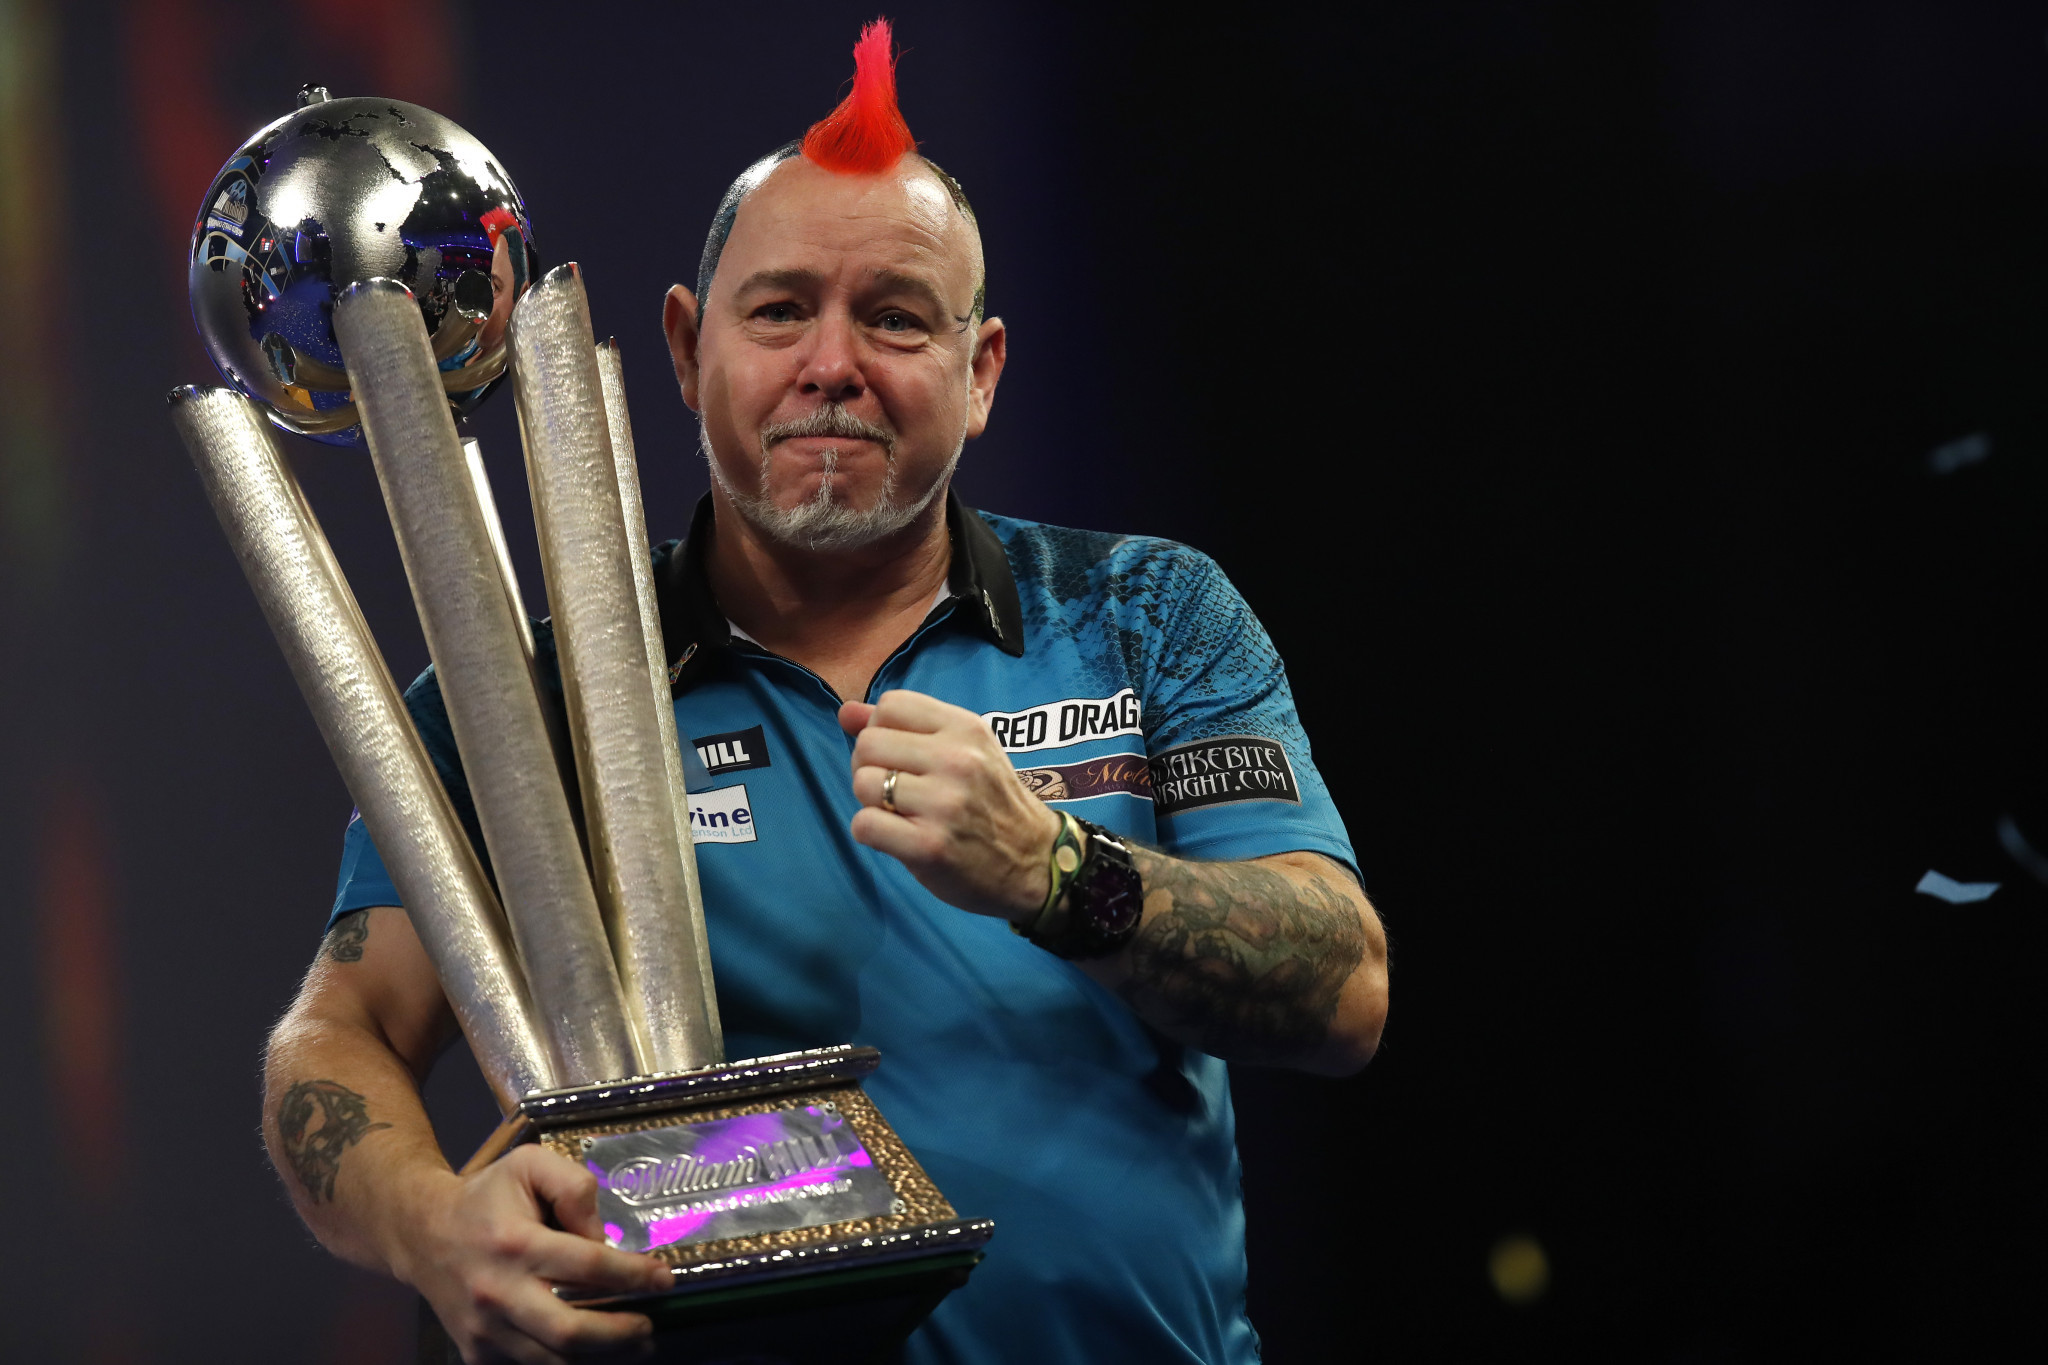 An emotional Peter Wright celebrated winning his second world title ©Getty Images